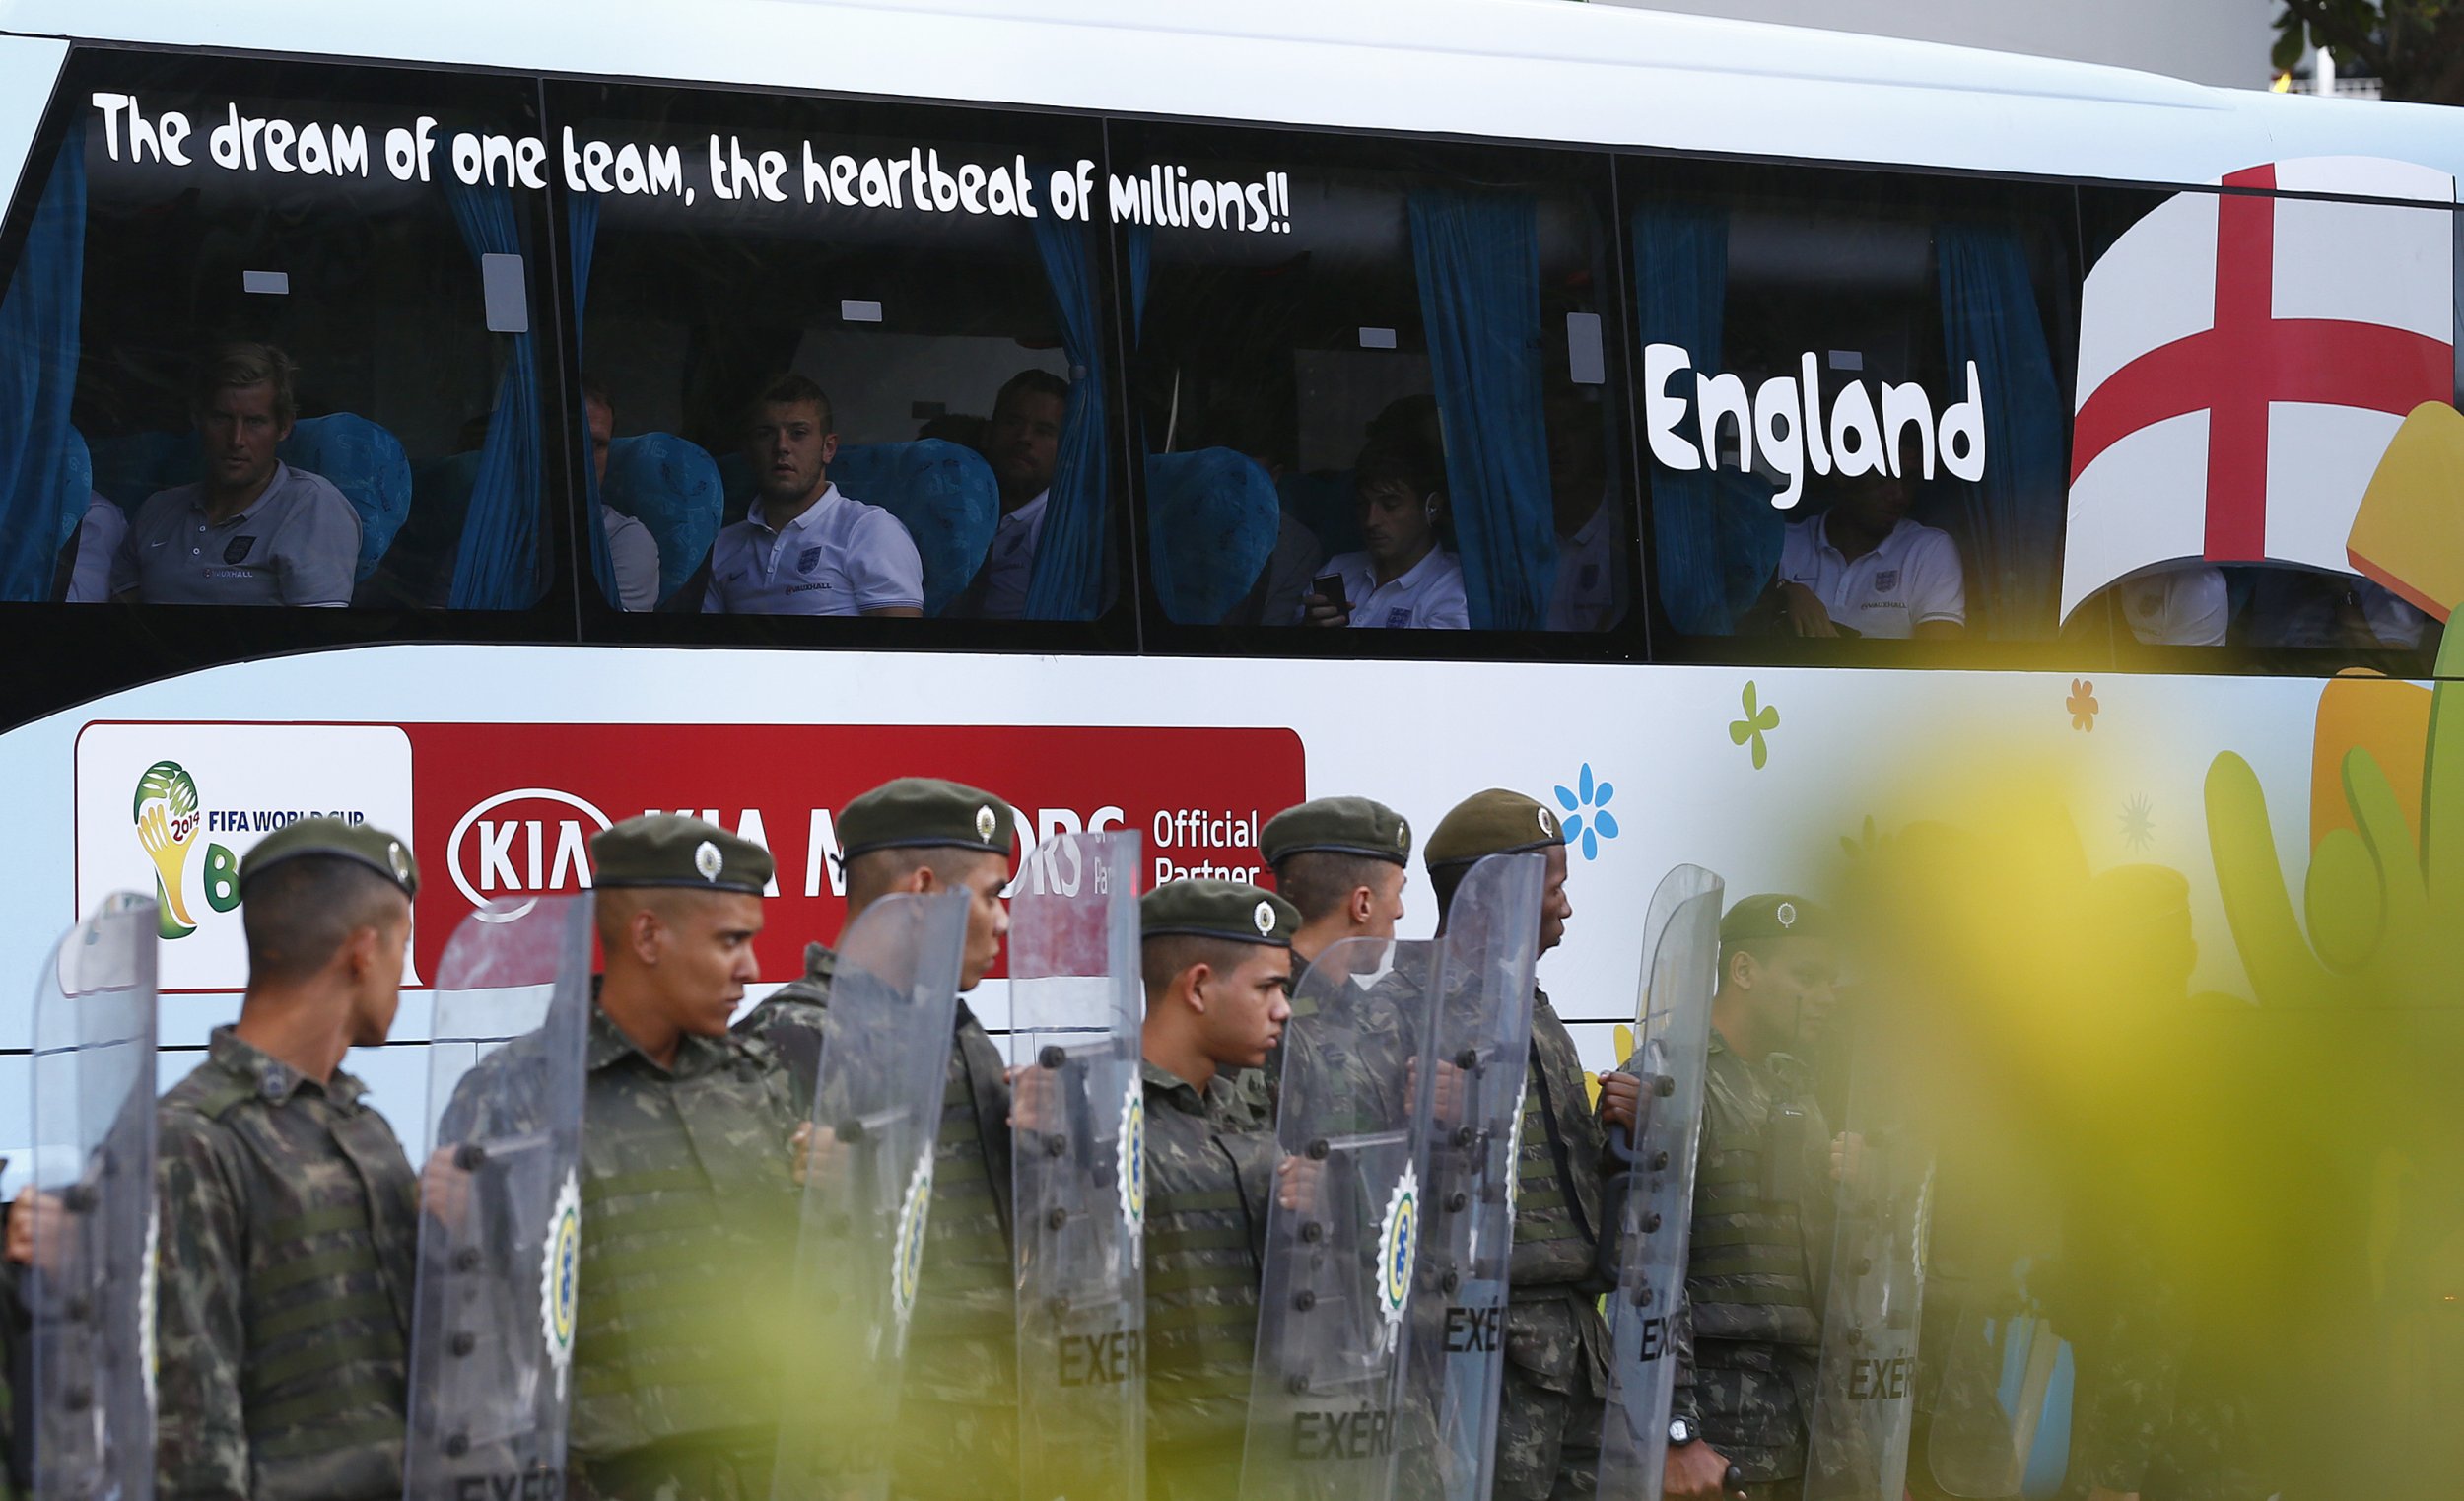 2014 World Cup - England Arrival